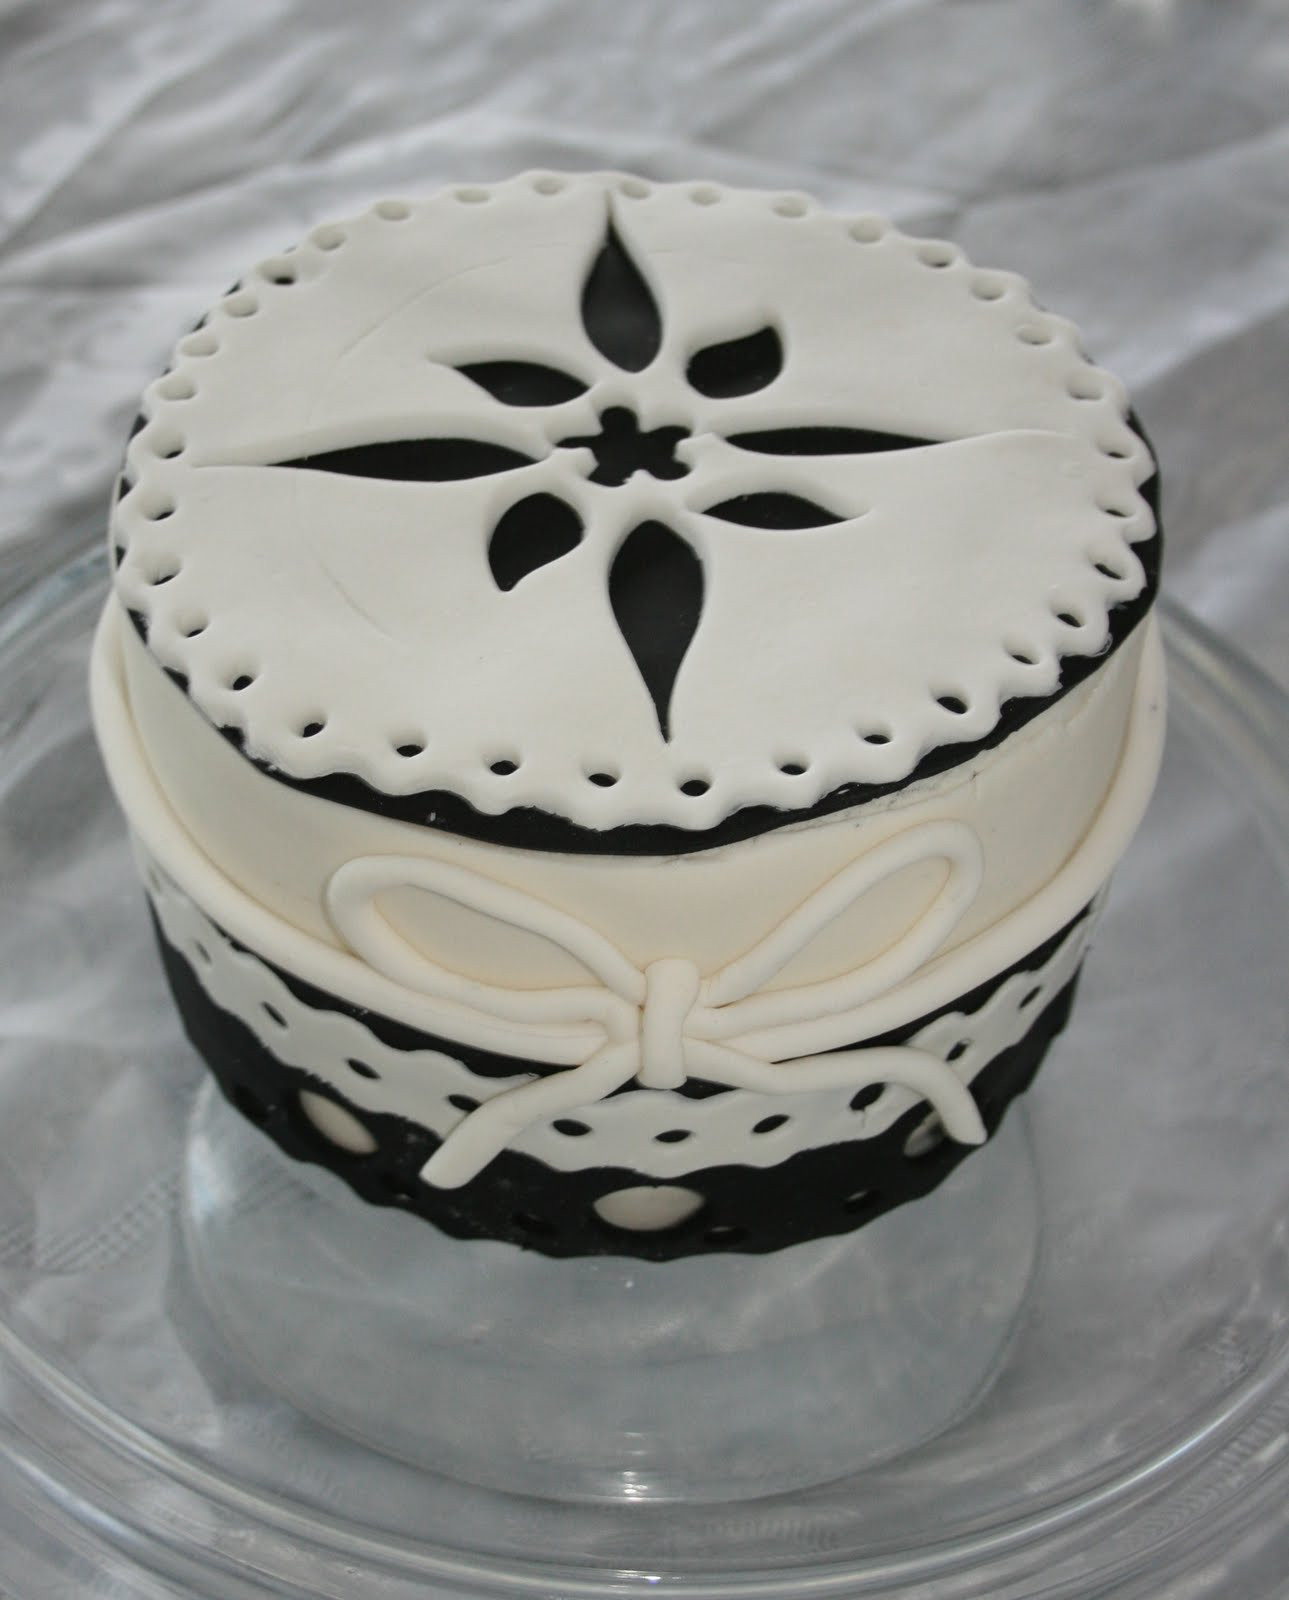 Black And White Birthday Cakes
 Baked By Design Black & White Birthday Cake